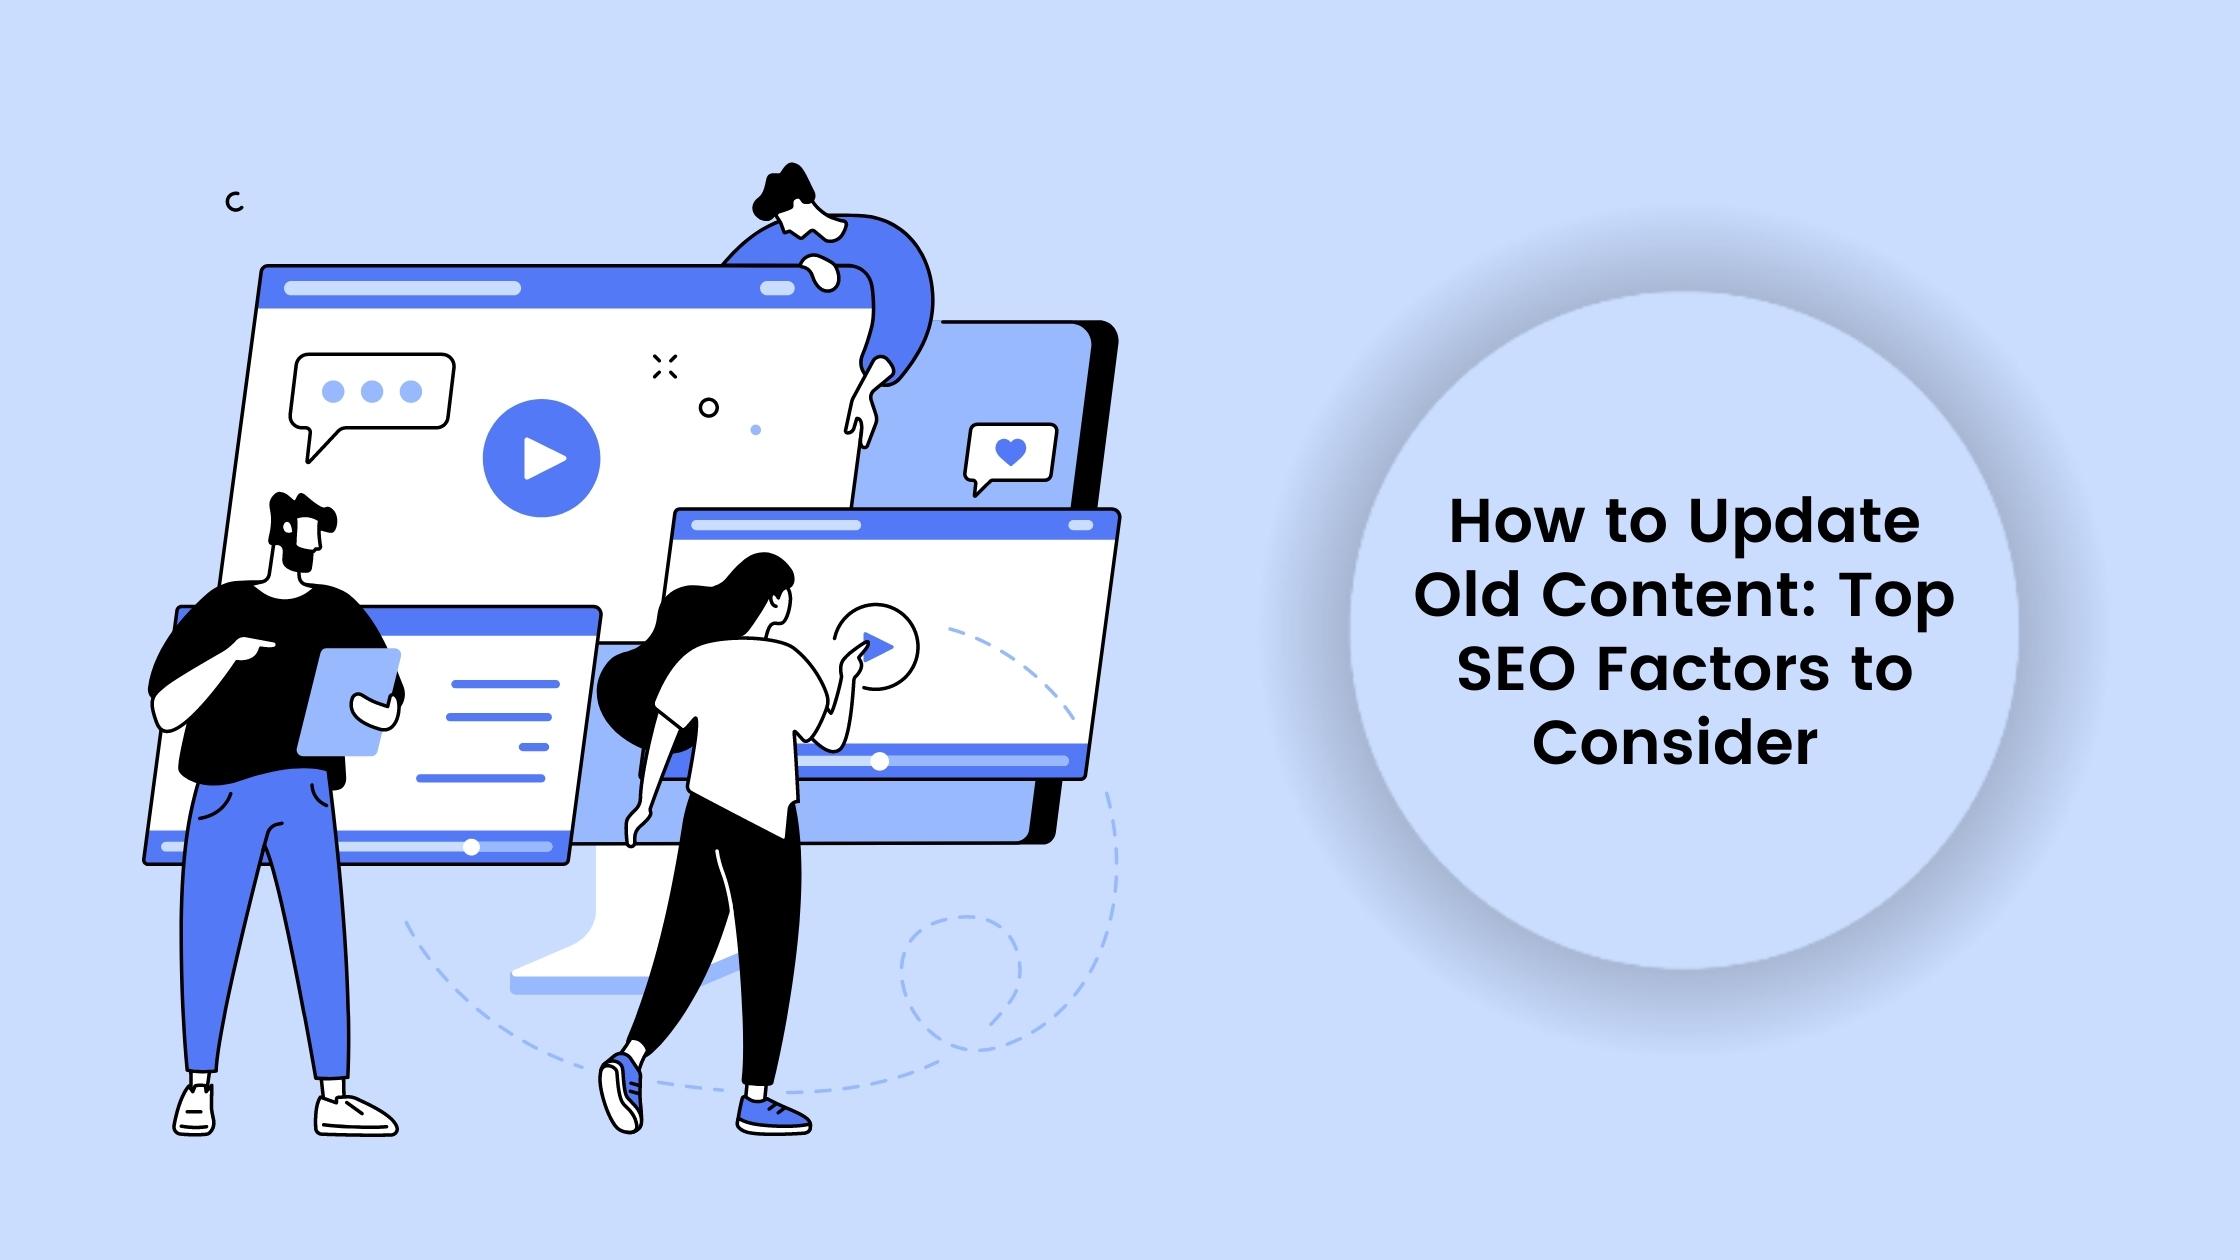 How to Update Old Content